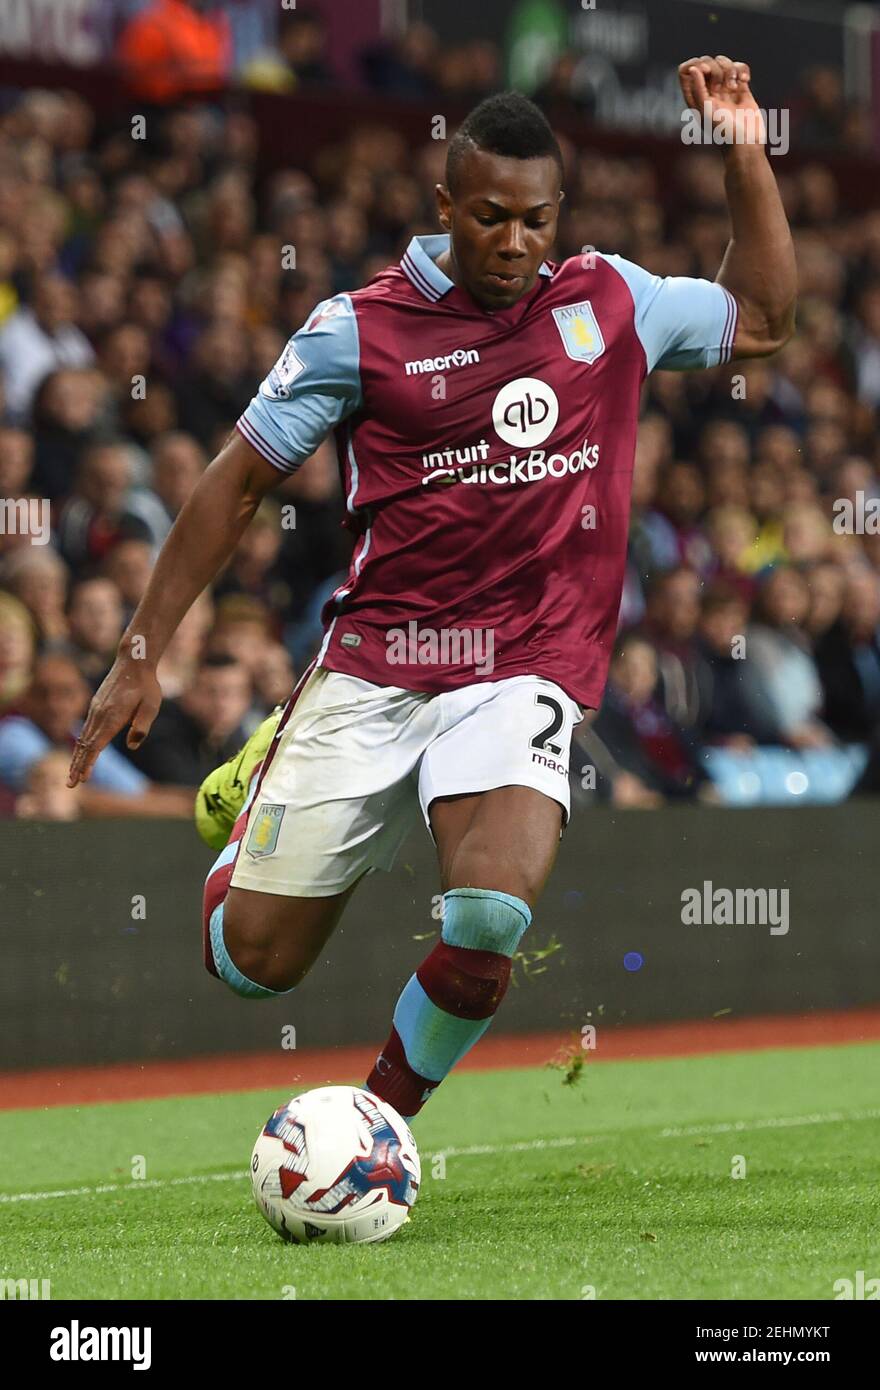 Football - Aston Villa v Notts County - Capital One Cup Second Round - Villa Park - 15/16 - 25/8/15 Aston Villa's Adama Traore Mandatory Credit: Action Images / Alan Walter  EDITORIAL USE ONLY. No use with unauthorized audio, video, data, fixture lists, club/league logos or 'live' services. Online in-match use limited to 45 images, no video emulation. No use in betting, games or single club/league/player publications.  Please contact your account representative for further details. Stock Photo